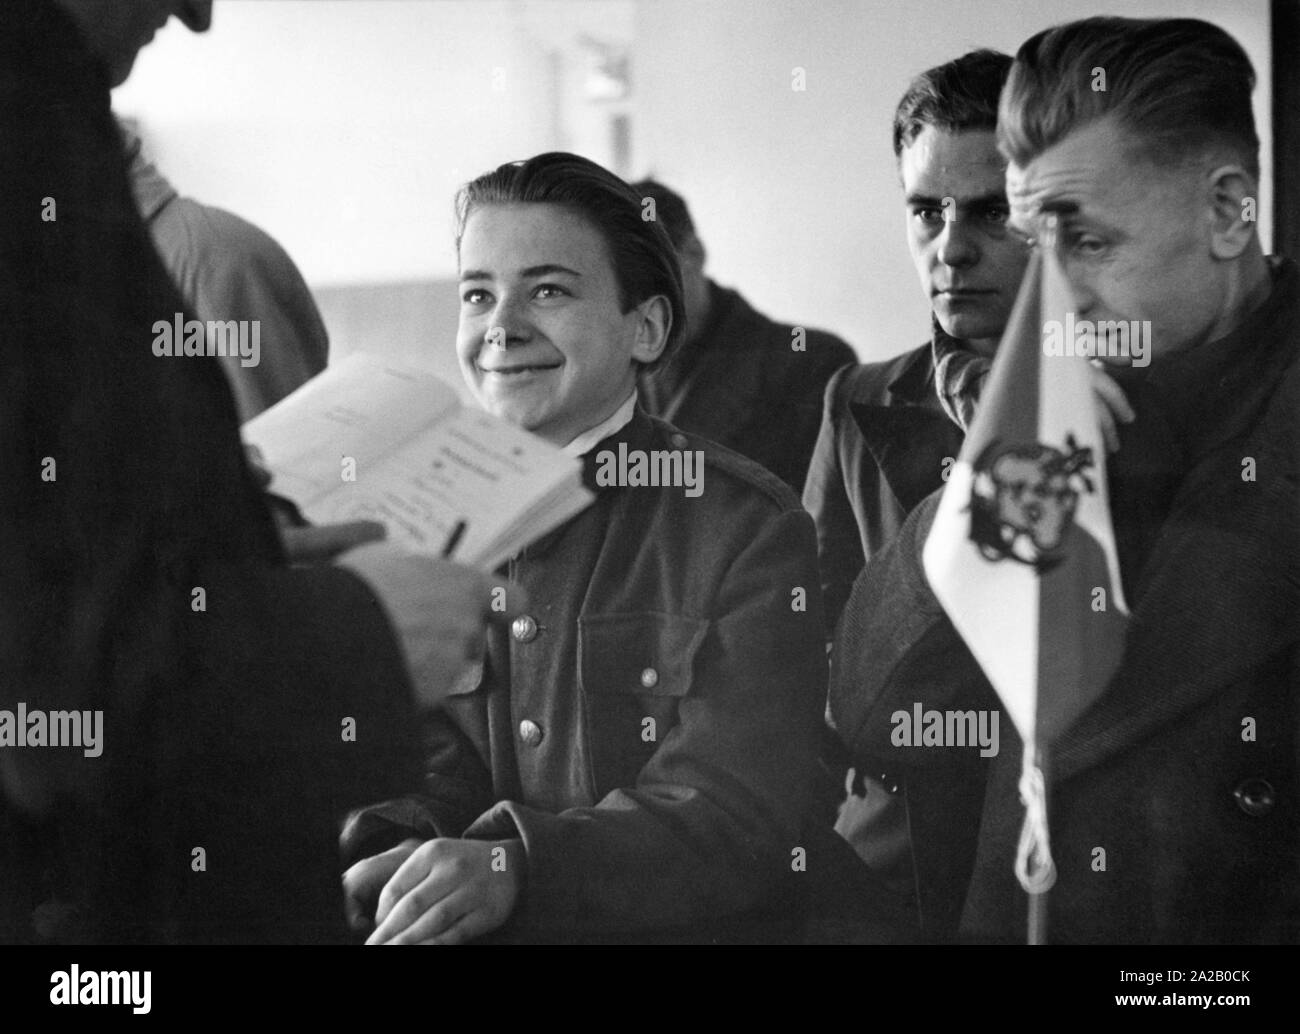 A 16-year-old boy from Hamburg is happy about being employed as cabin boy at HAPAG. Stock Photo